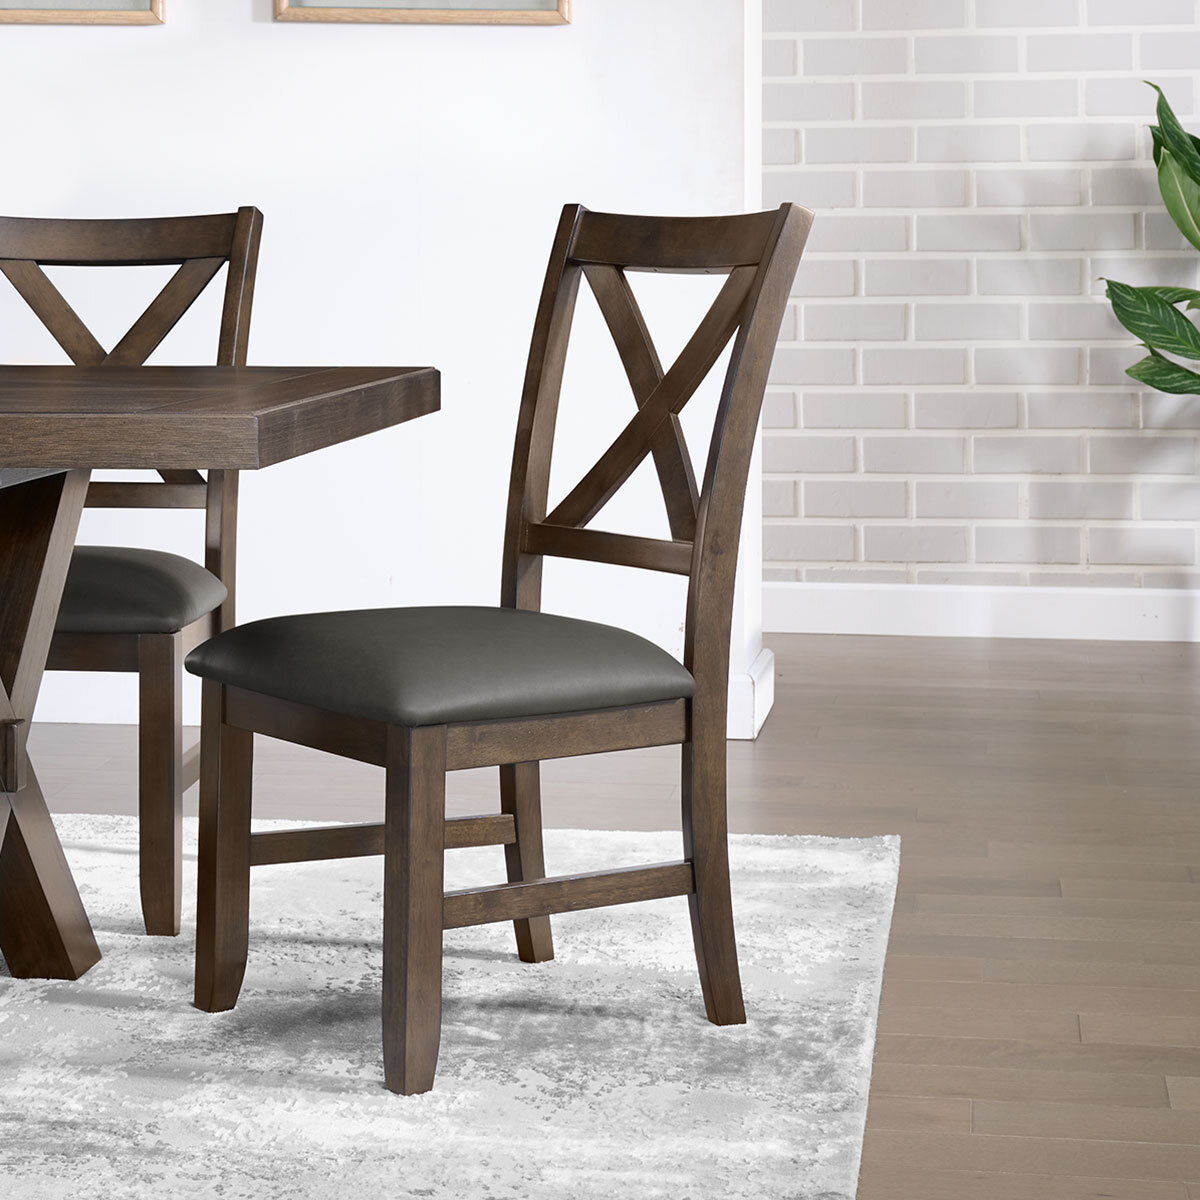 Blakely Cross Back Dining Chairs, 2 Pack